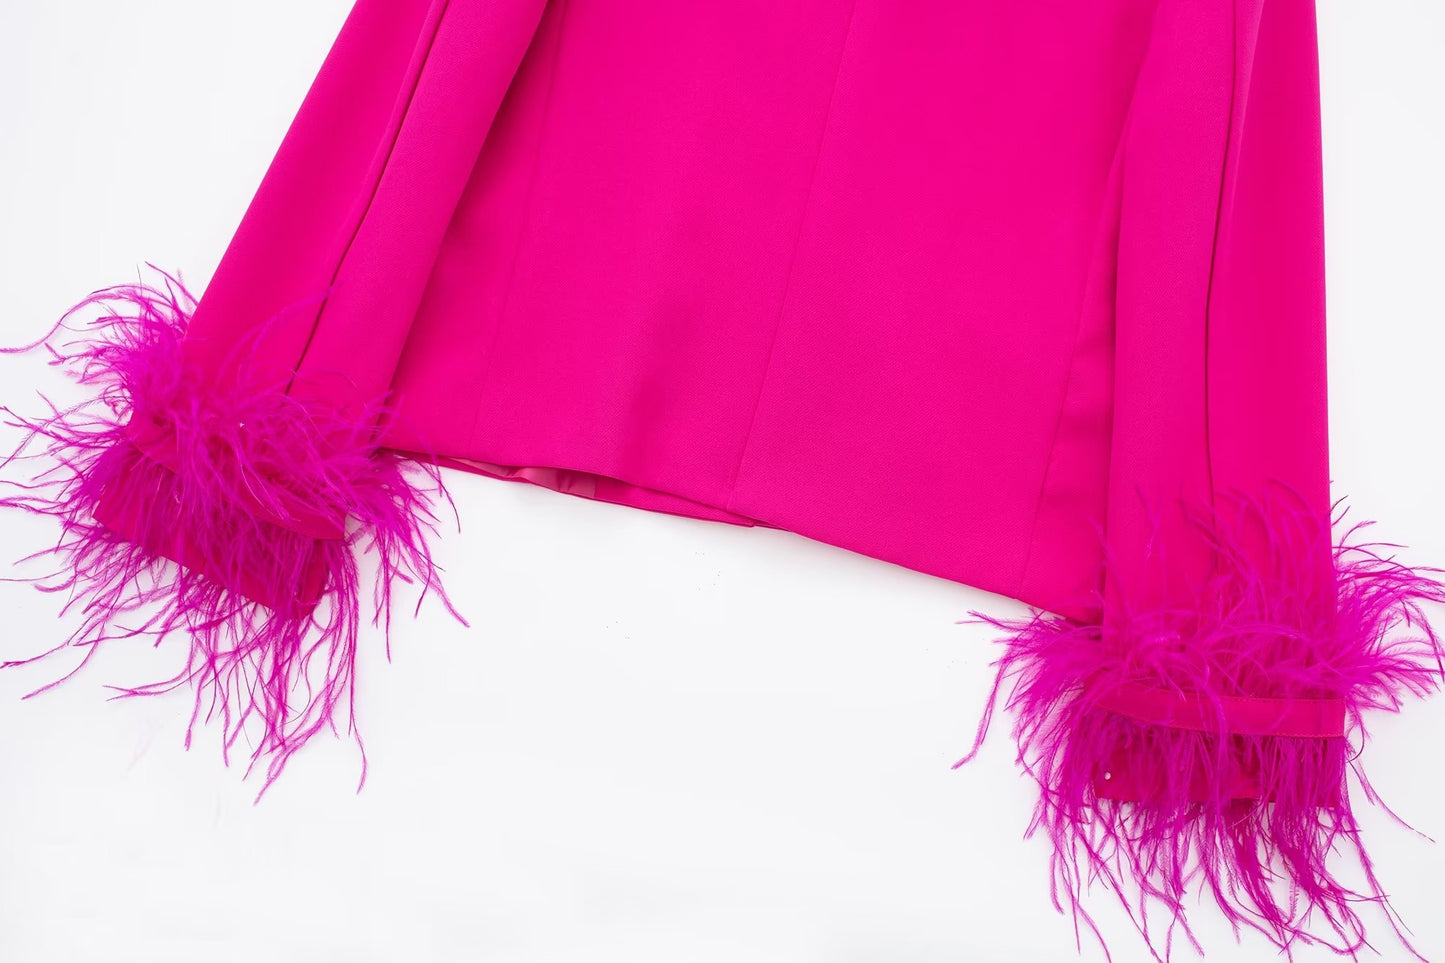 Hot Pink Outfits | Hot Pink Feathers Blazer